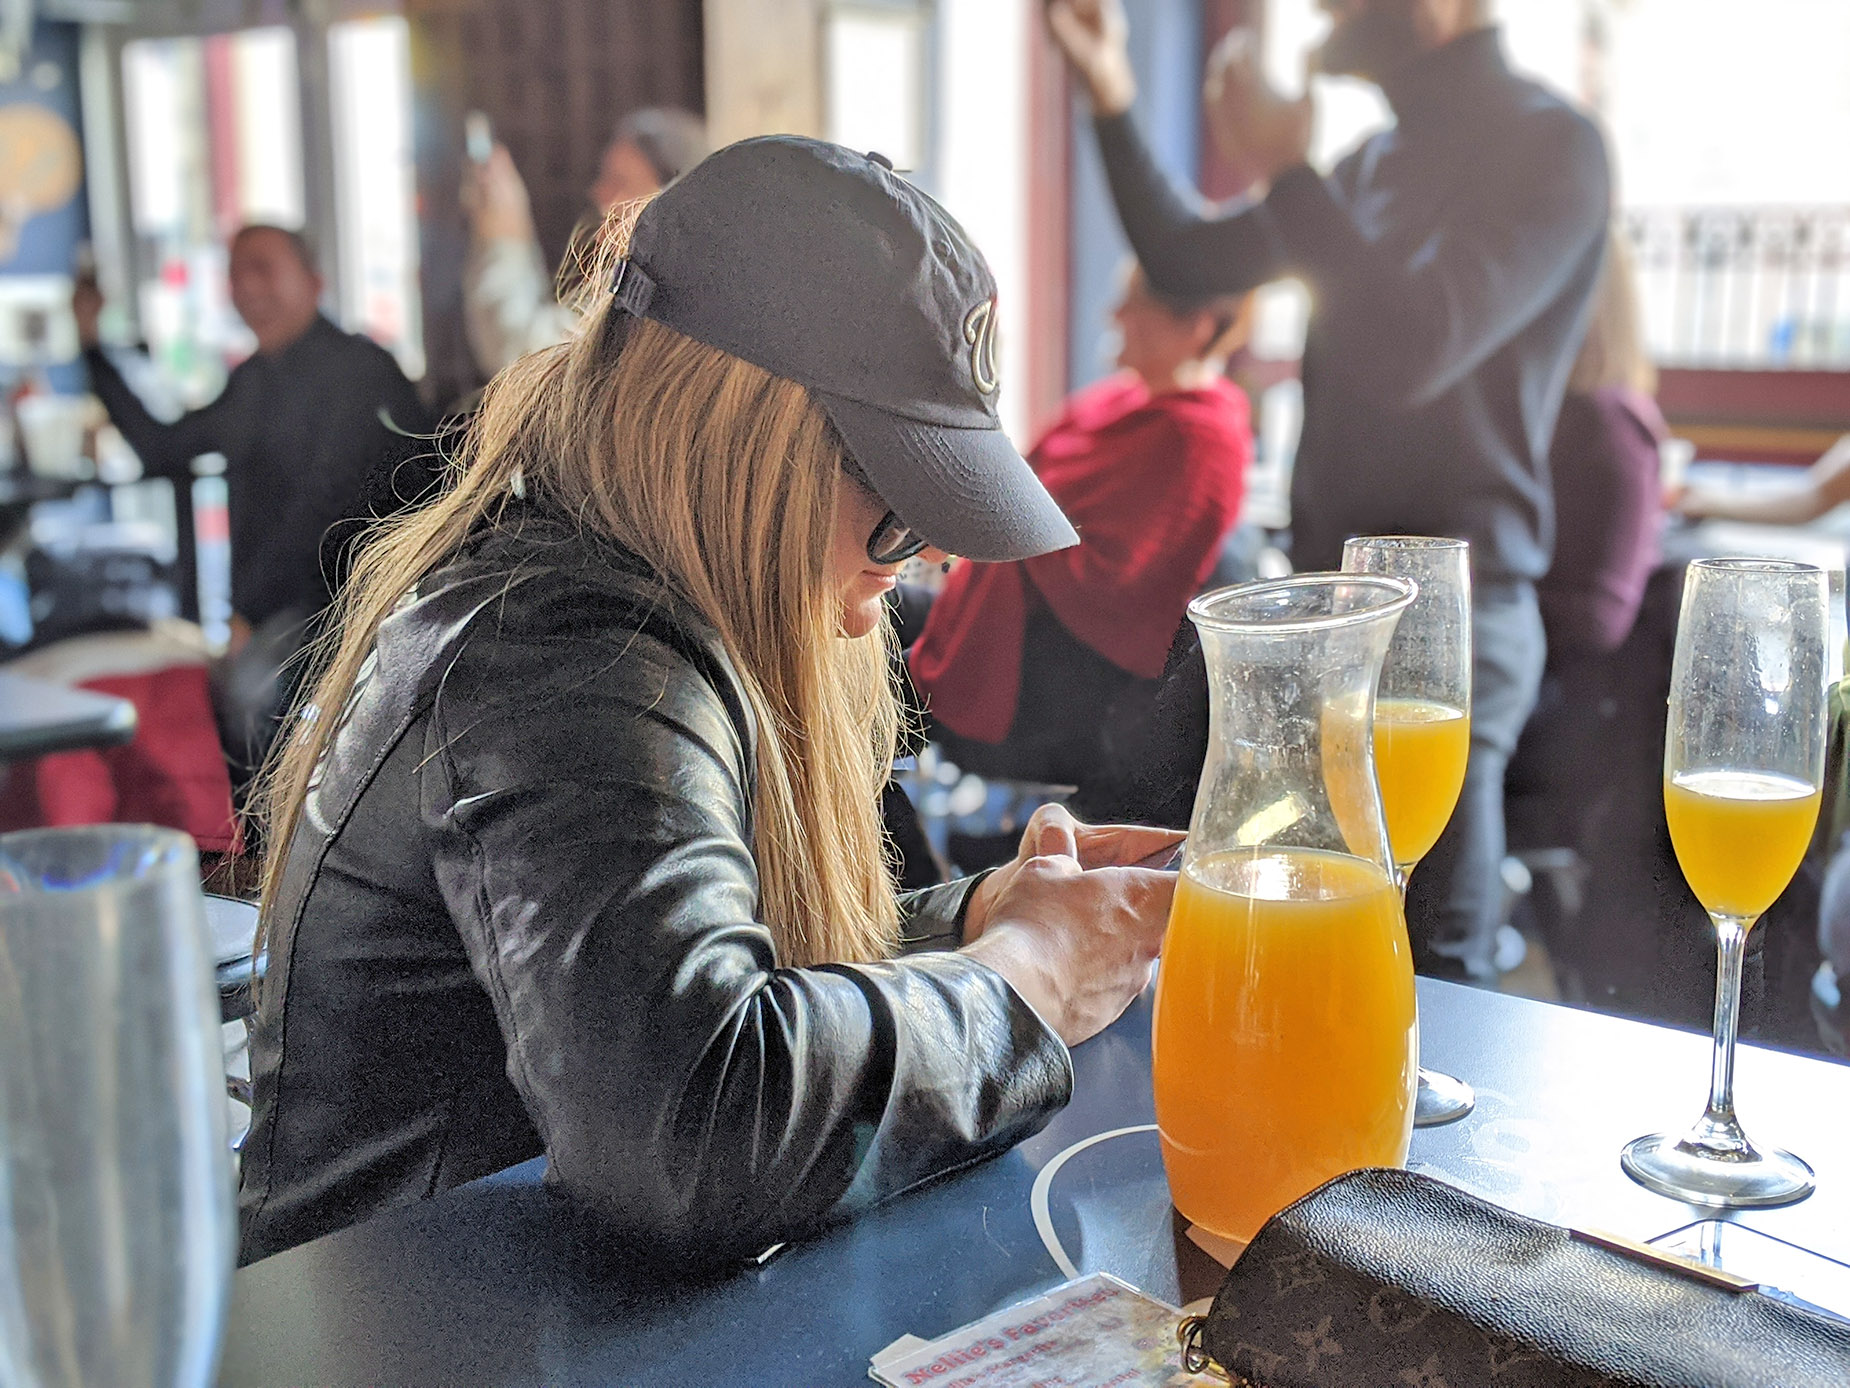 A woman possibly nursing a hangover at brunch.